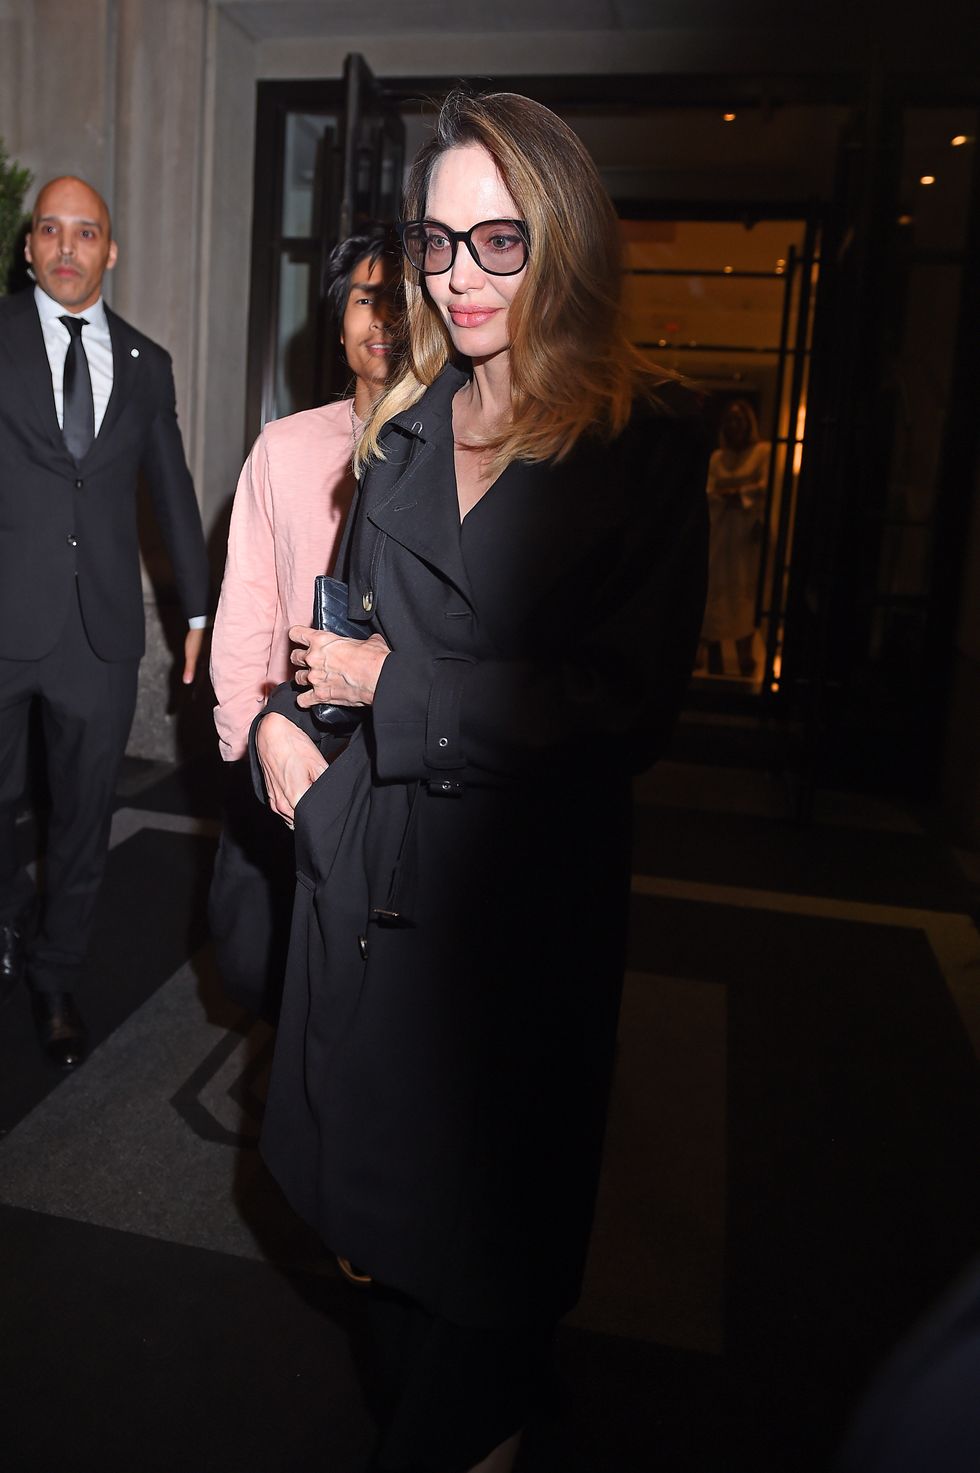 Angelina Jolie Can’t Stop Wearing This Sleek Black Trench Coat